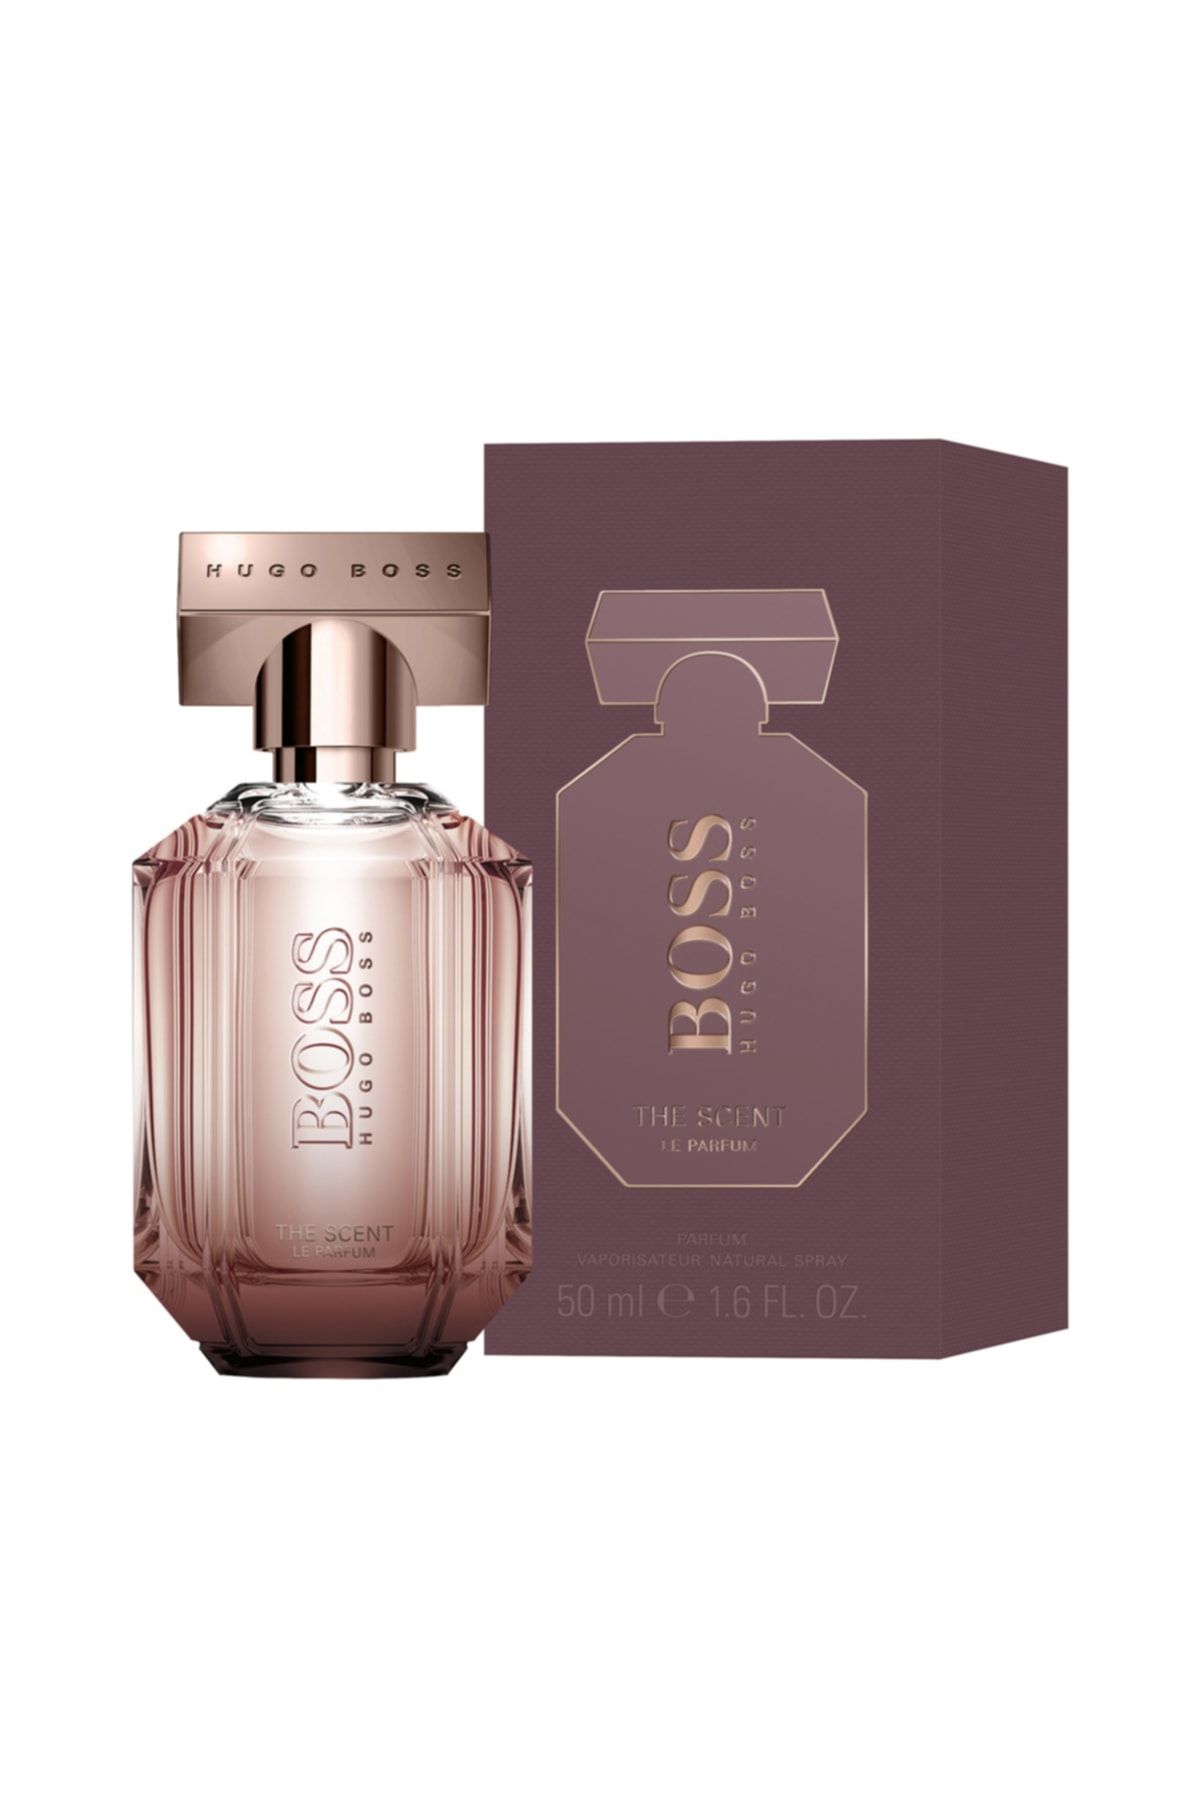 Hugo Boss The Scent Le Parfum For Her 50 Ml